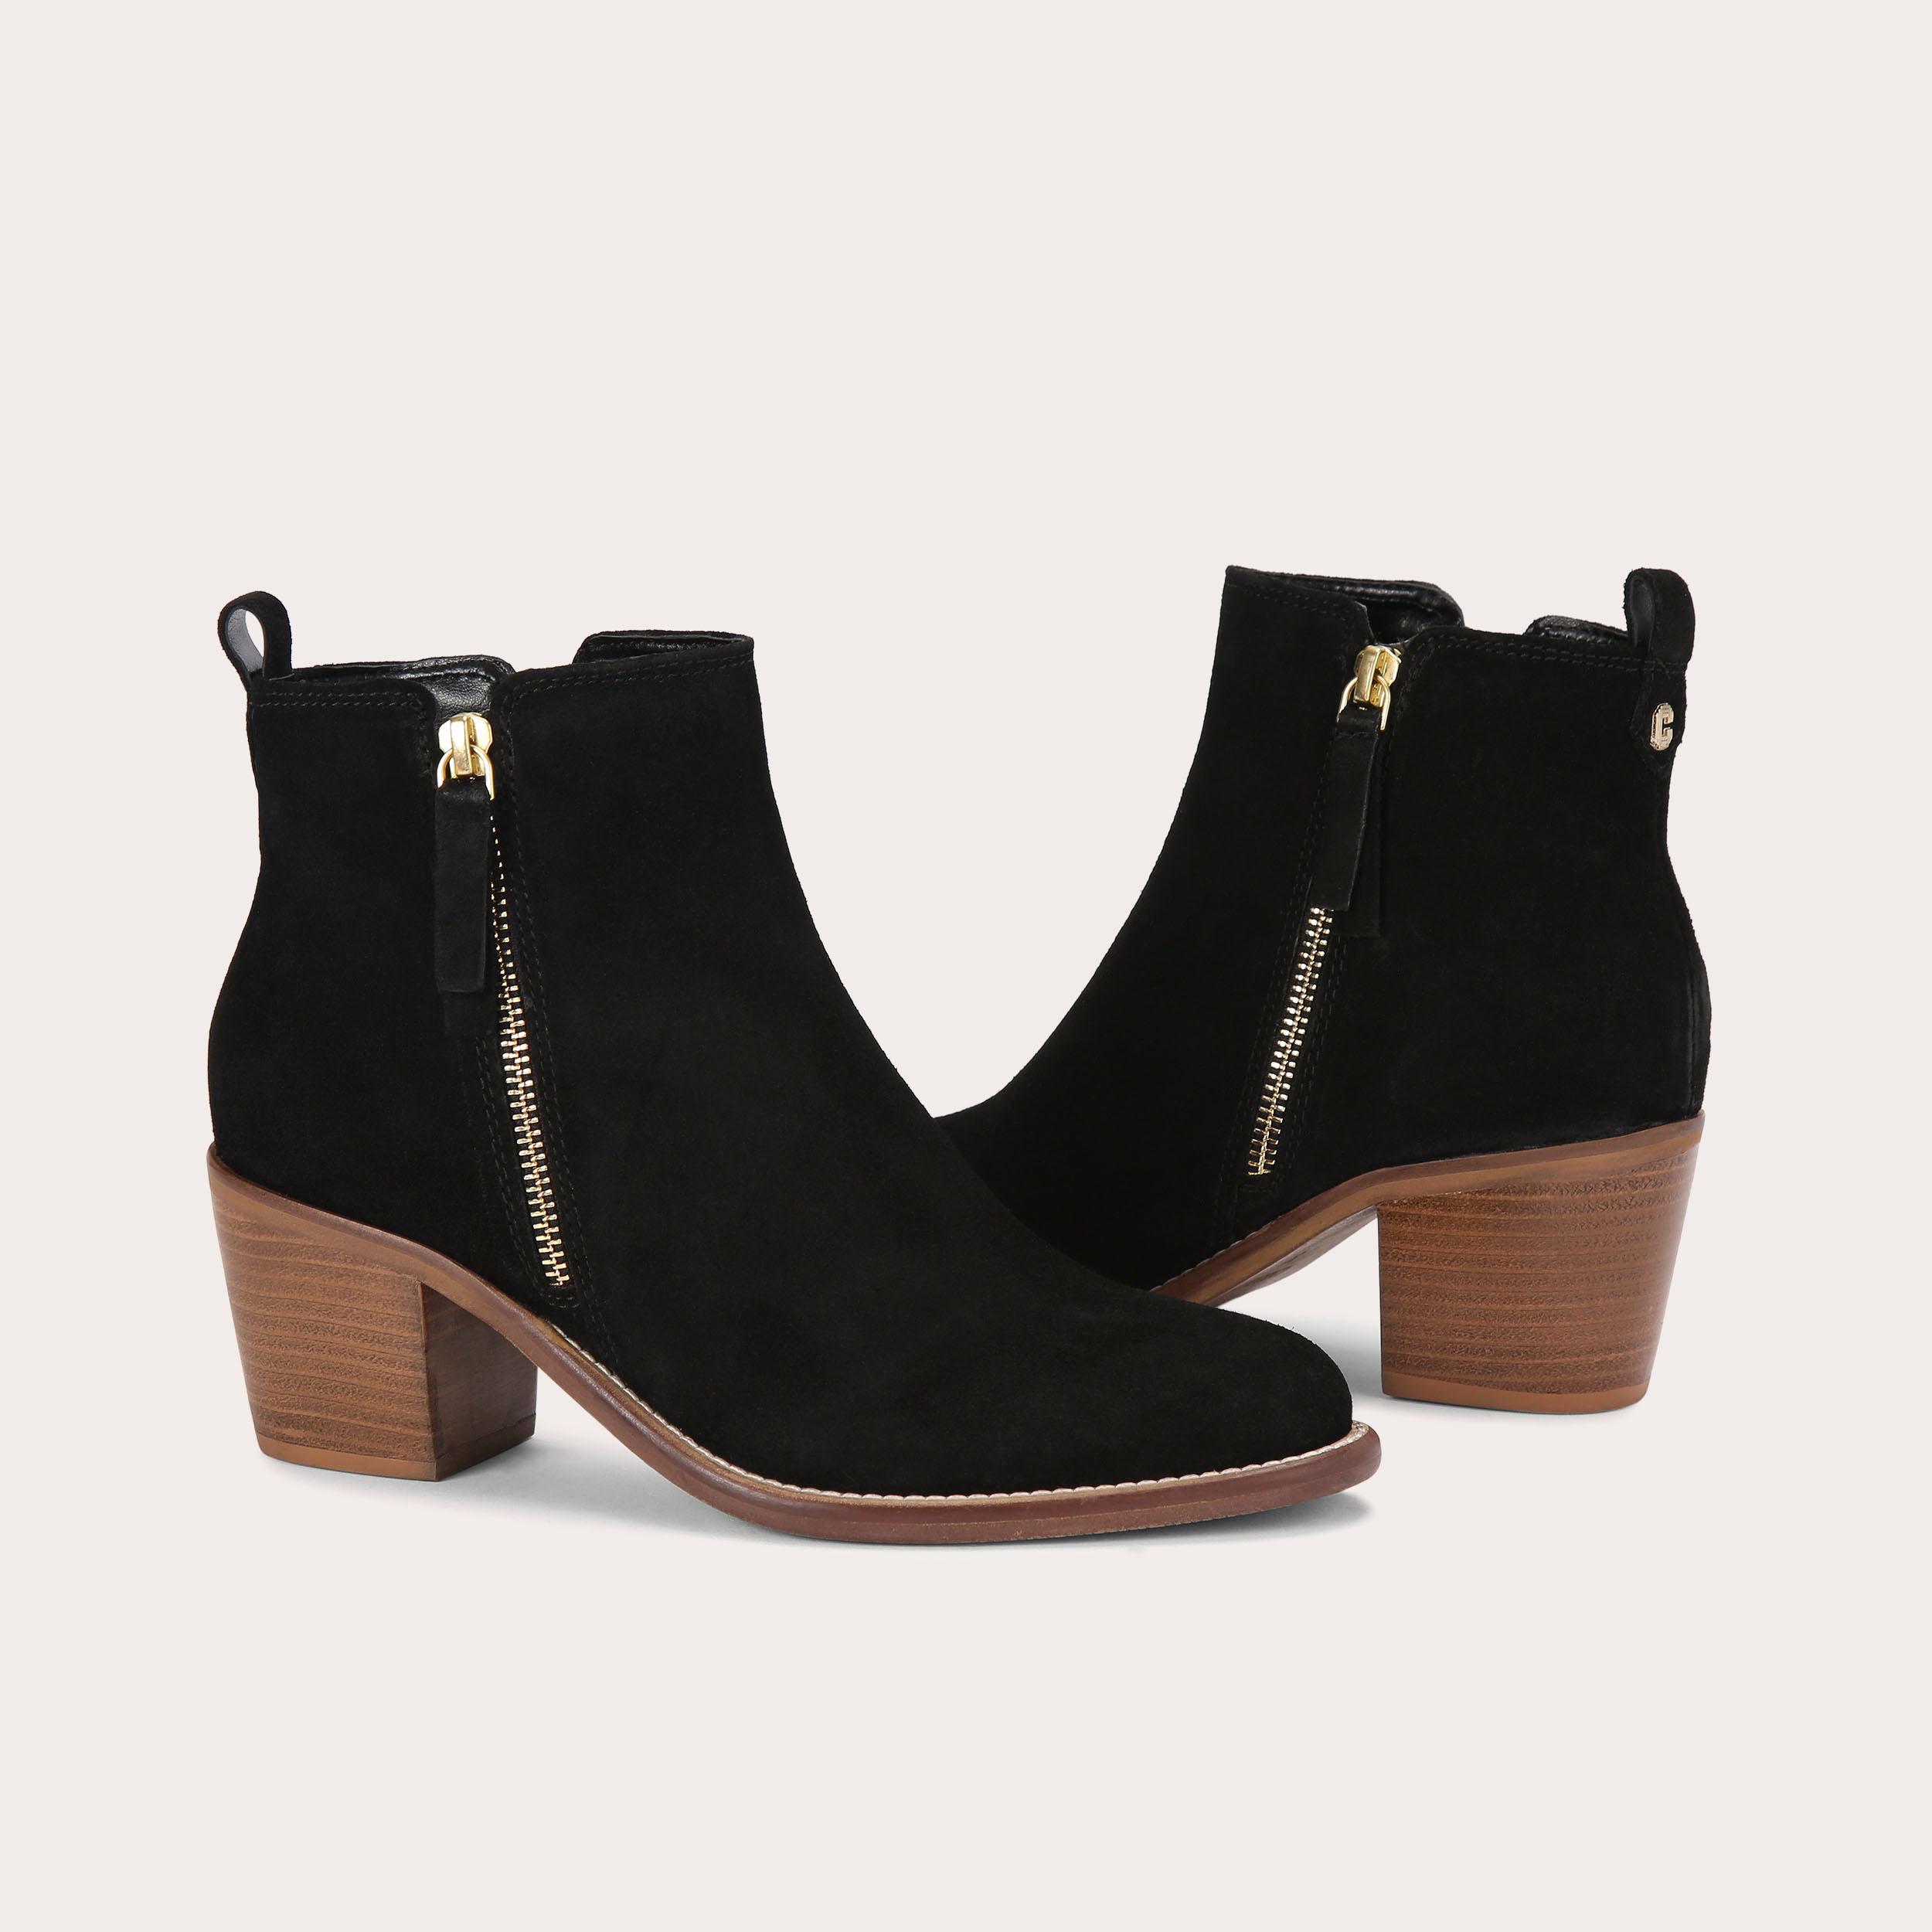 SECIL Black Suede Ankle Boots by CARVELA